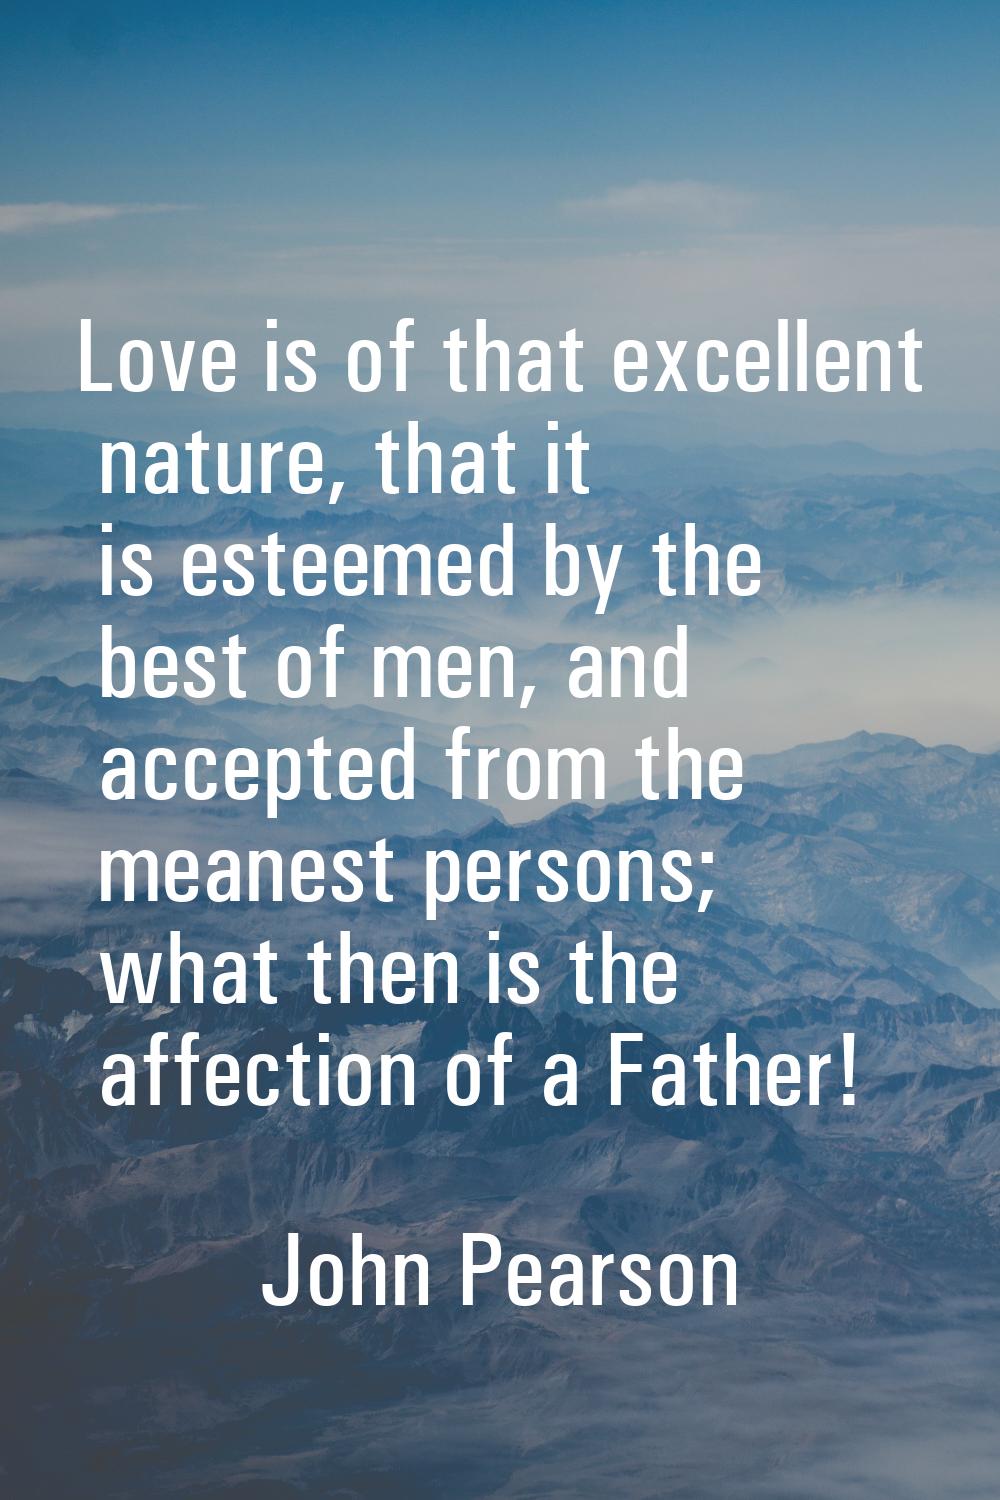 Love is of that excellent nature, that it is esteemed by the best of men, and accepted from the mea